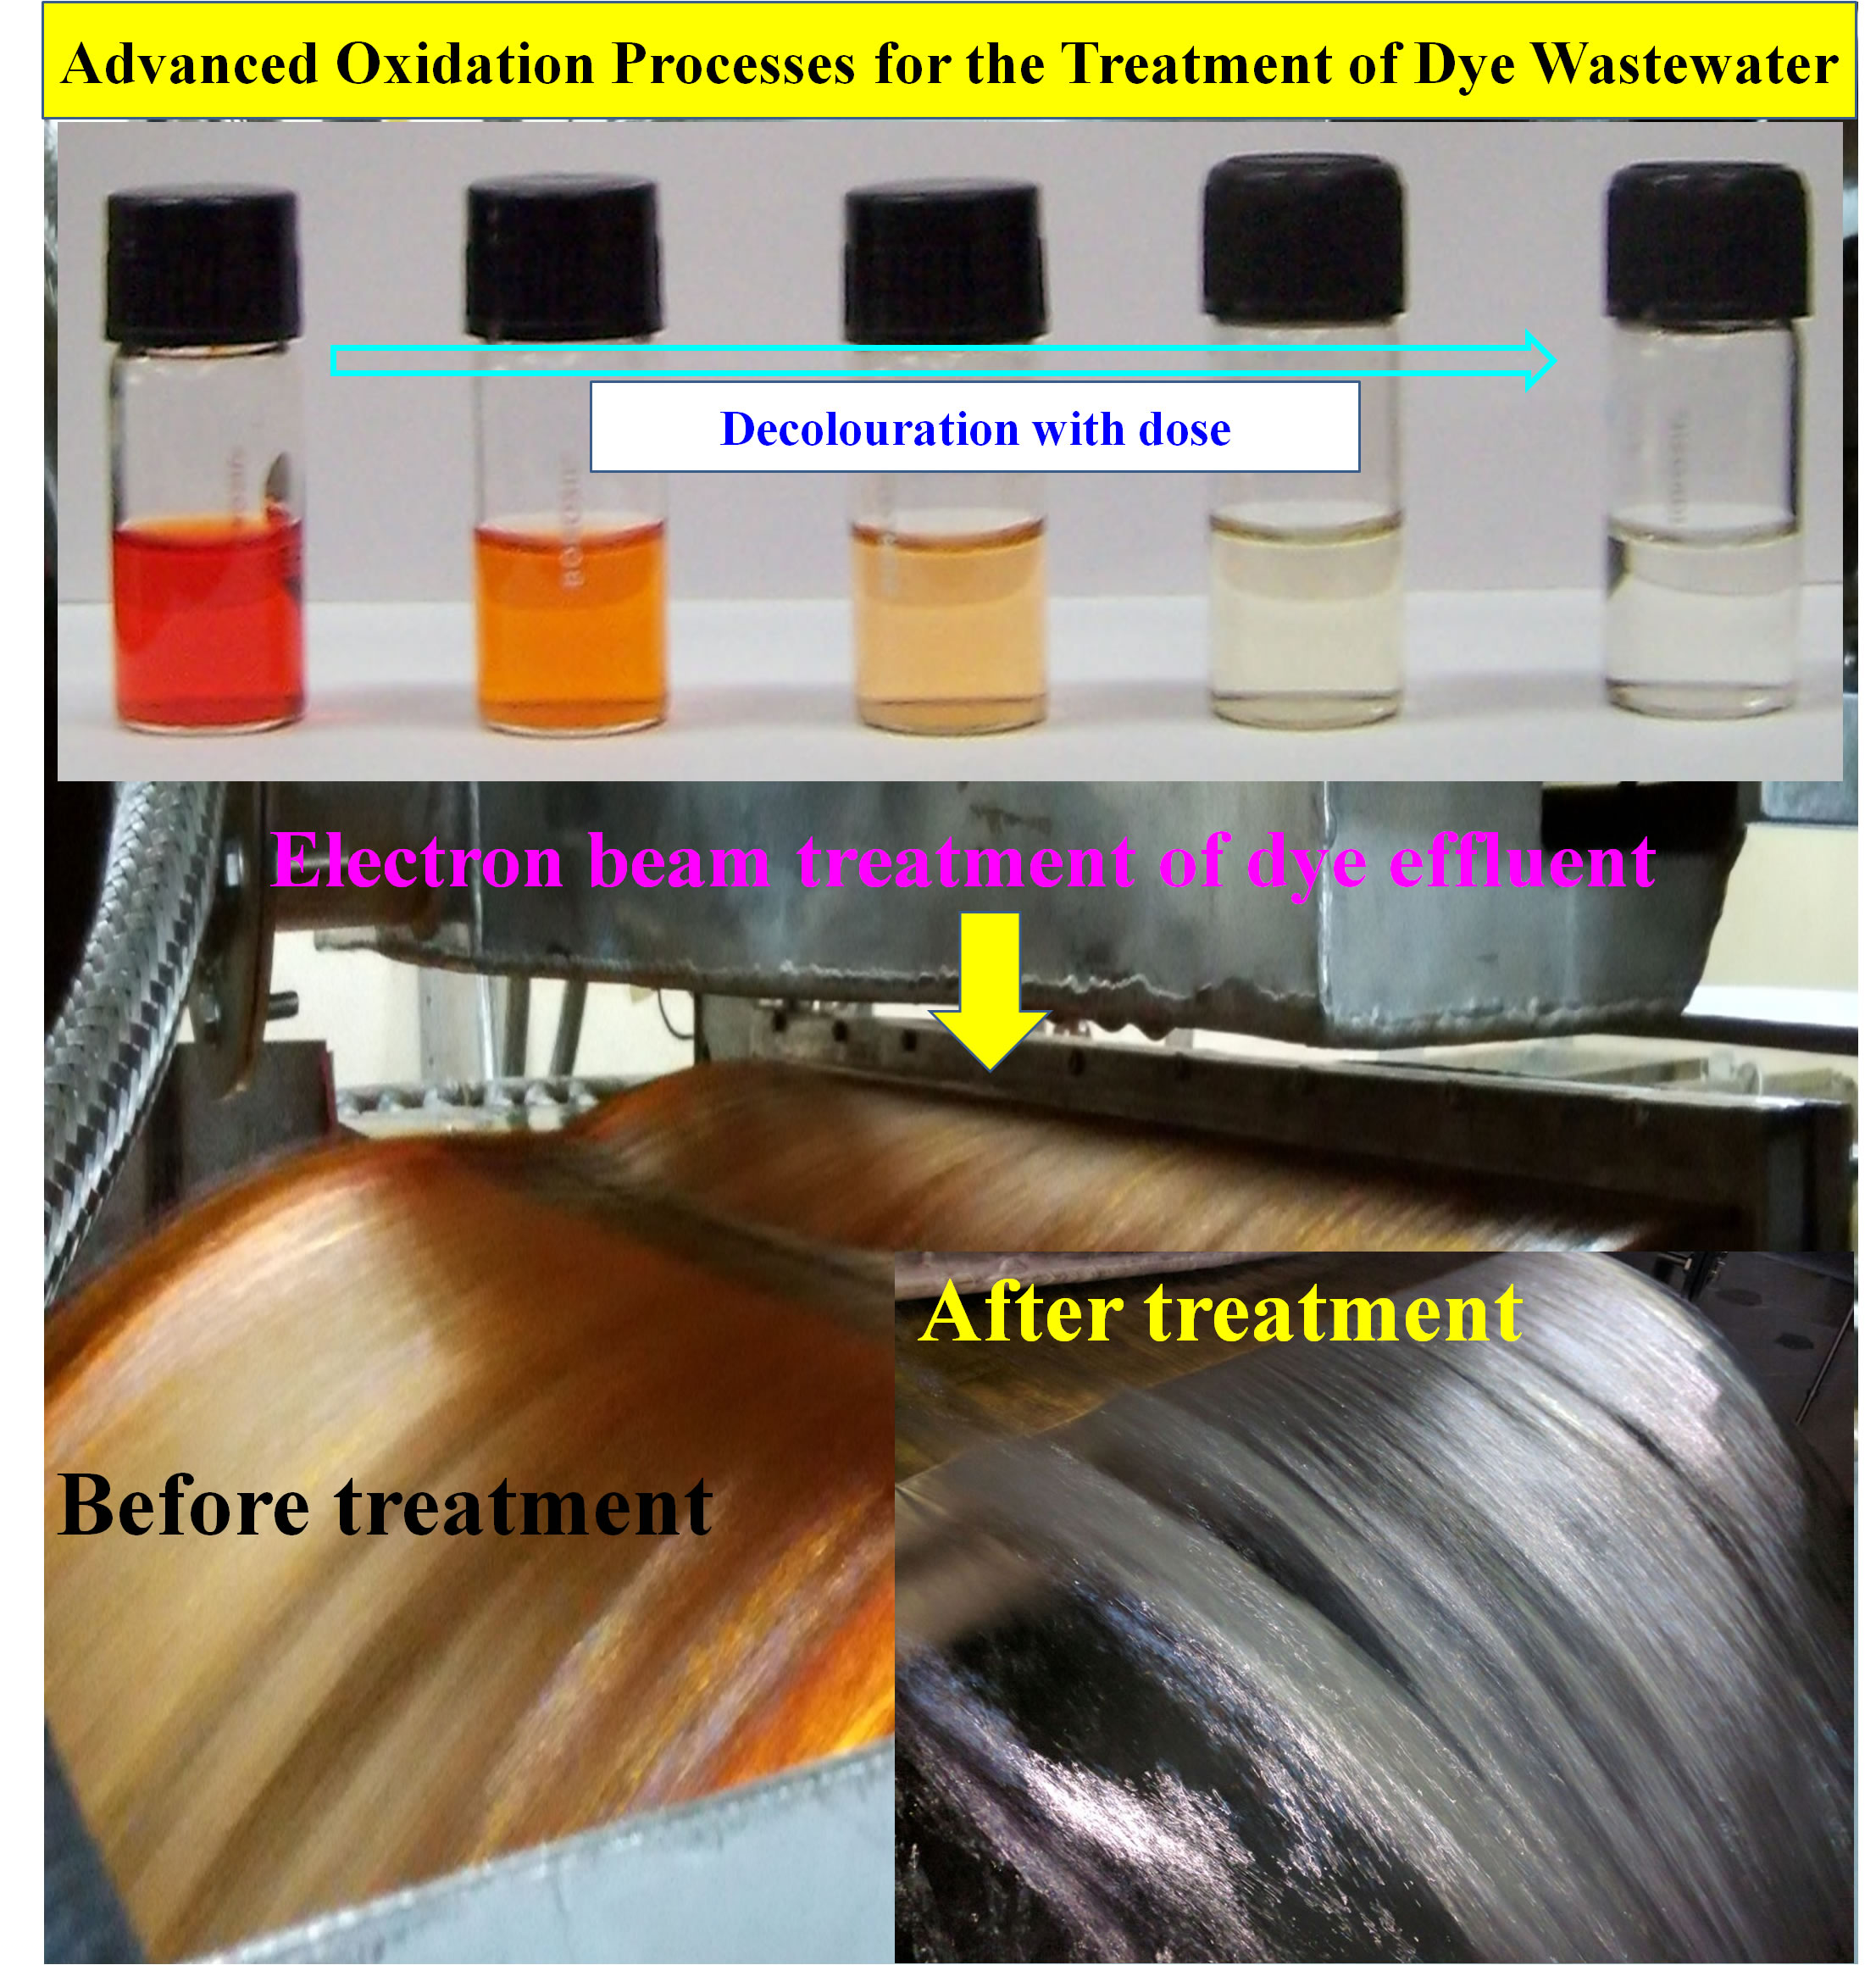 Advanced oxidation processes for treatment of dye waste water